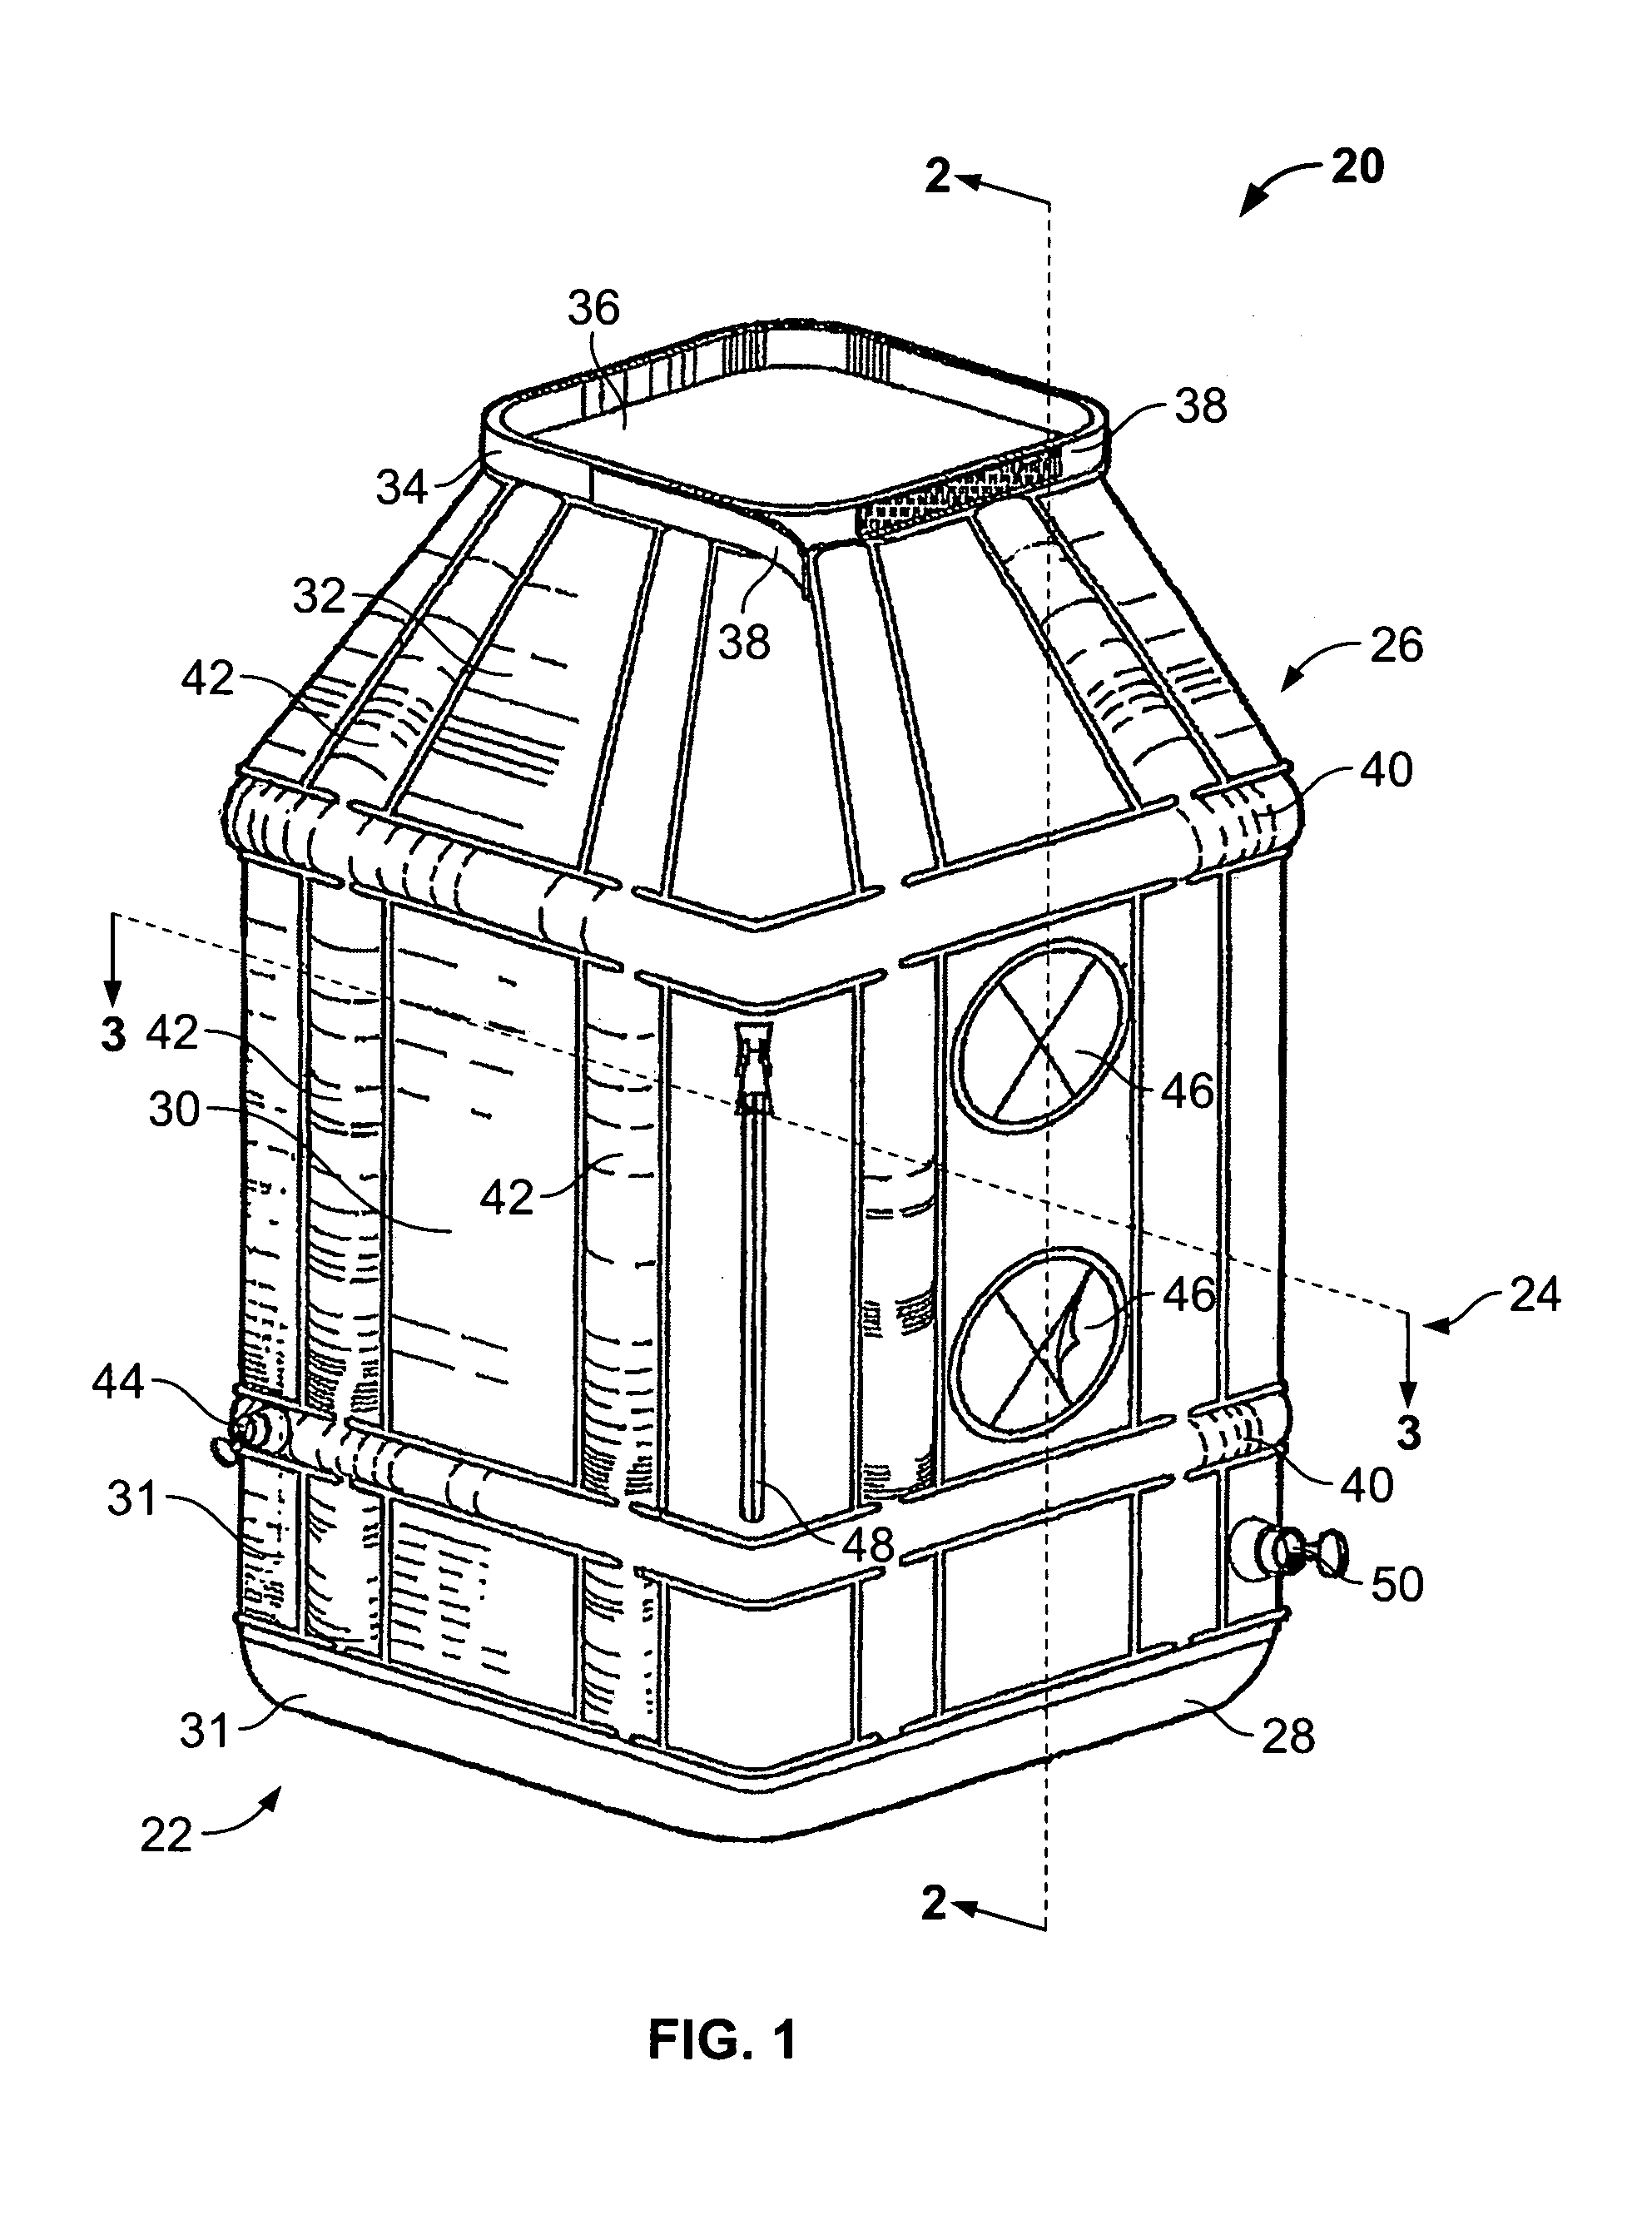 Fluid containment device